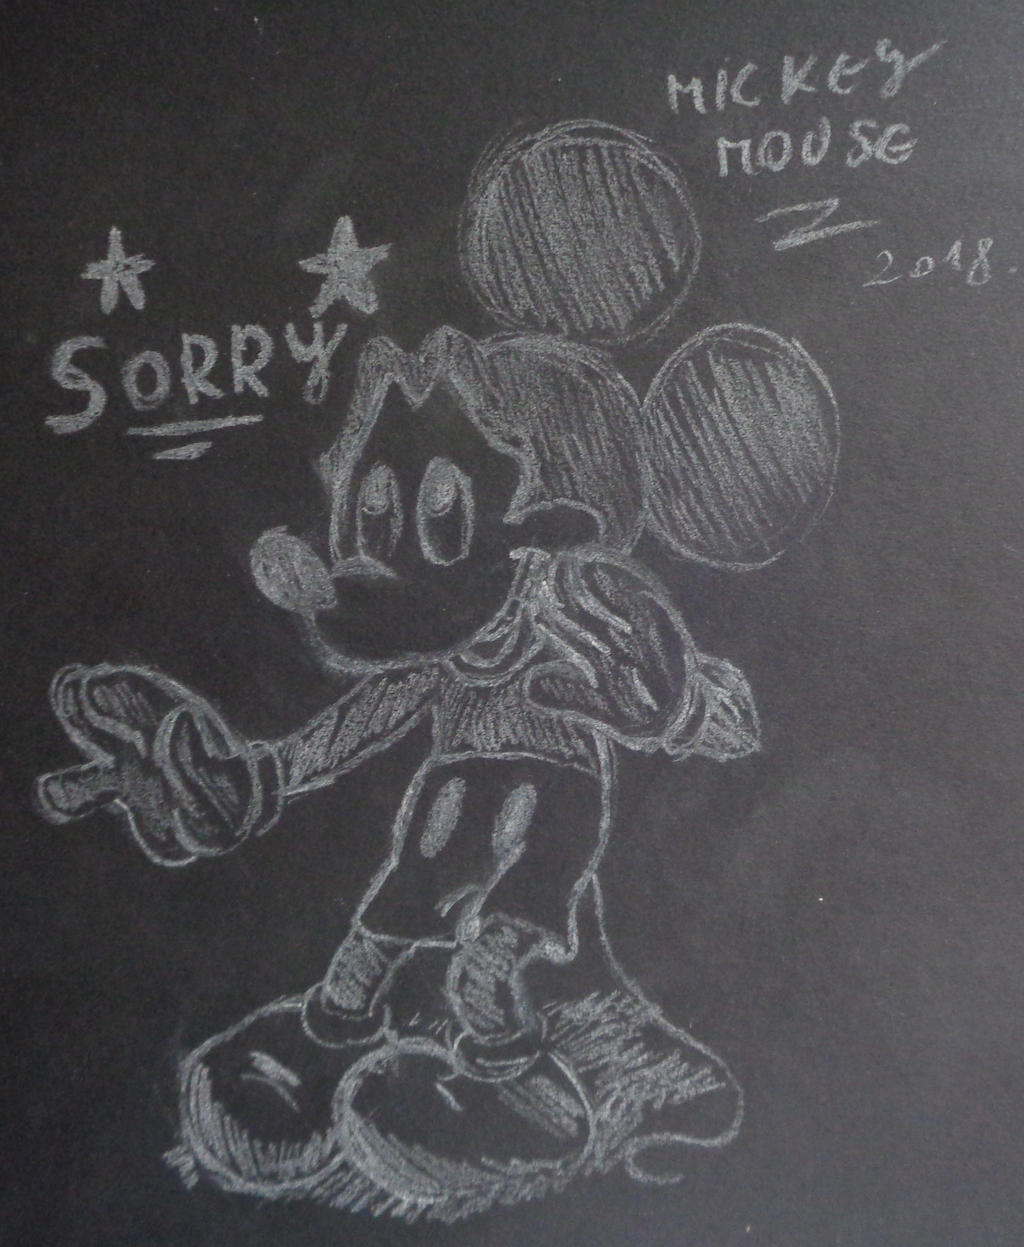 Bone marrow short Inhale Mickey mouse:sorry by westhemime on DeviantArt